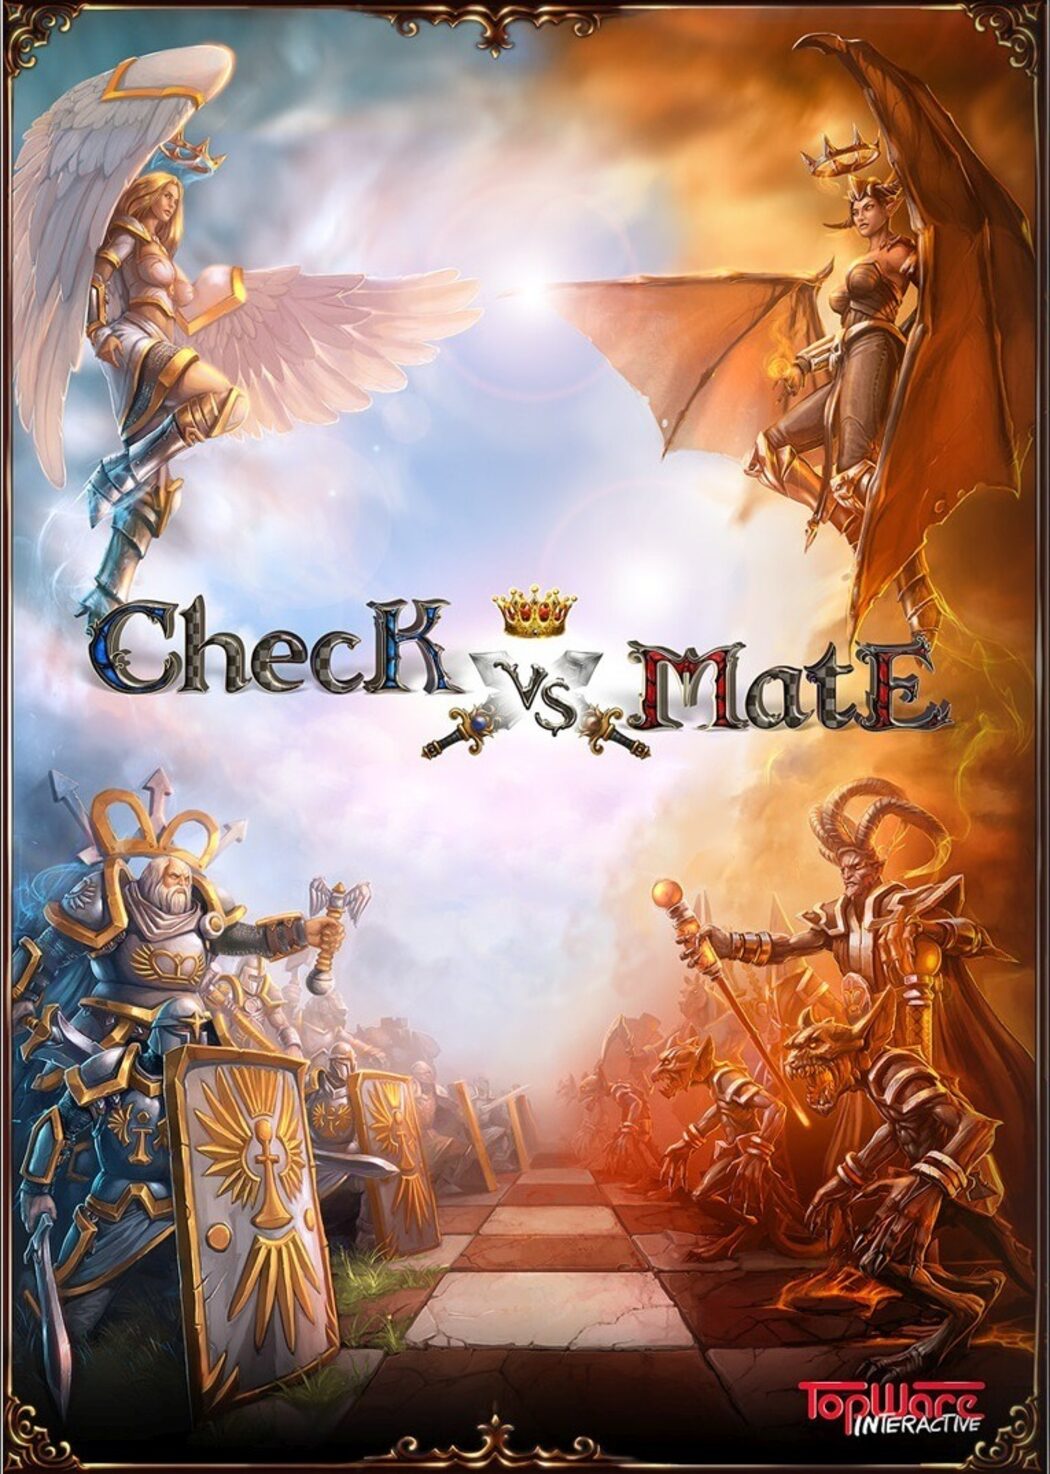 Check vs. Mate - DLC 1 Floating Island [PC] [Download]